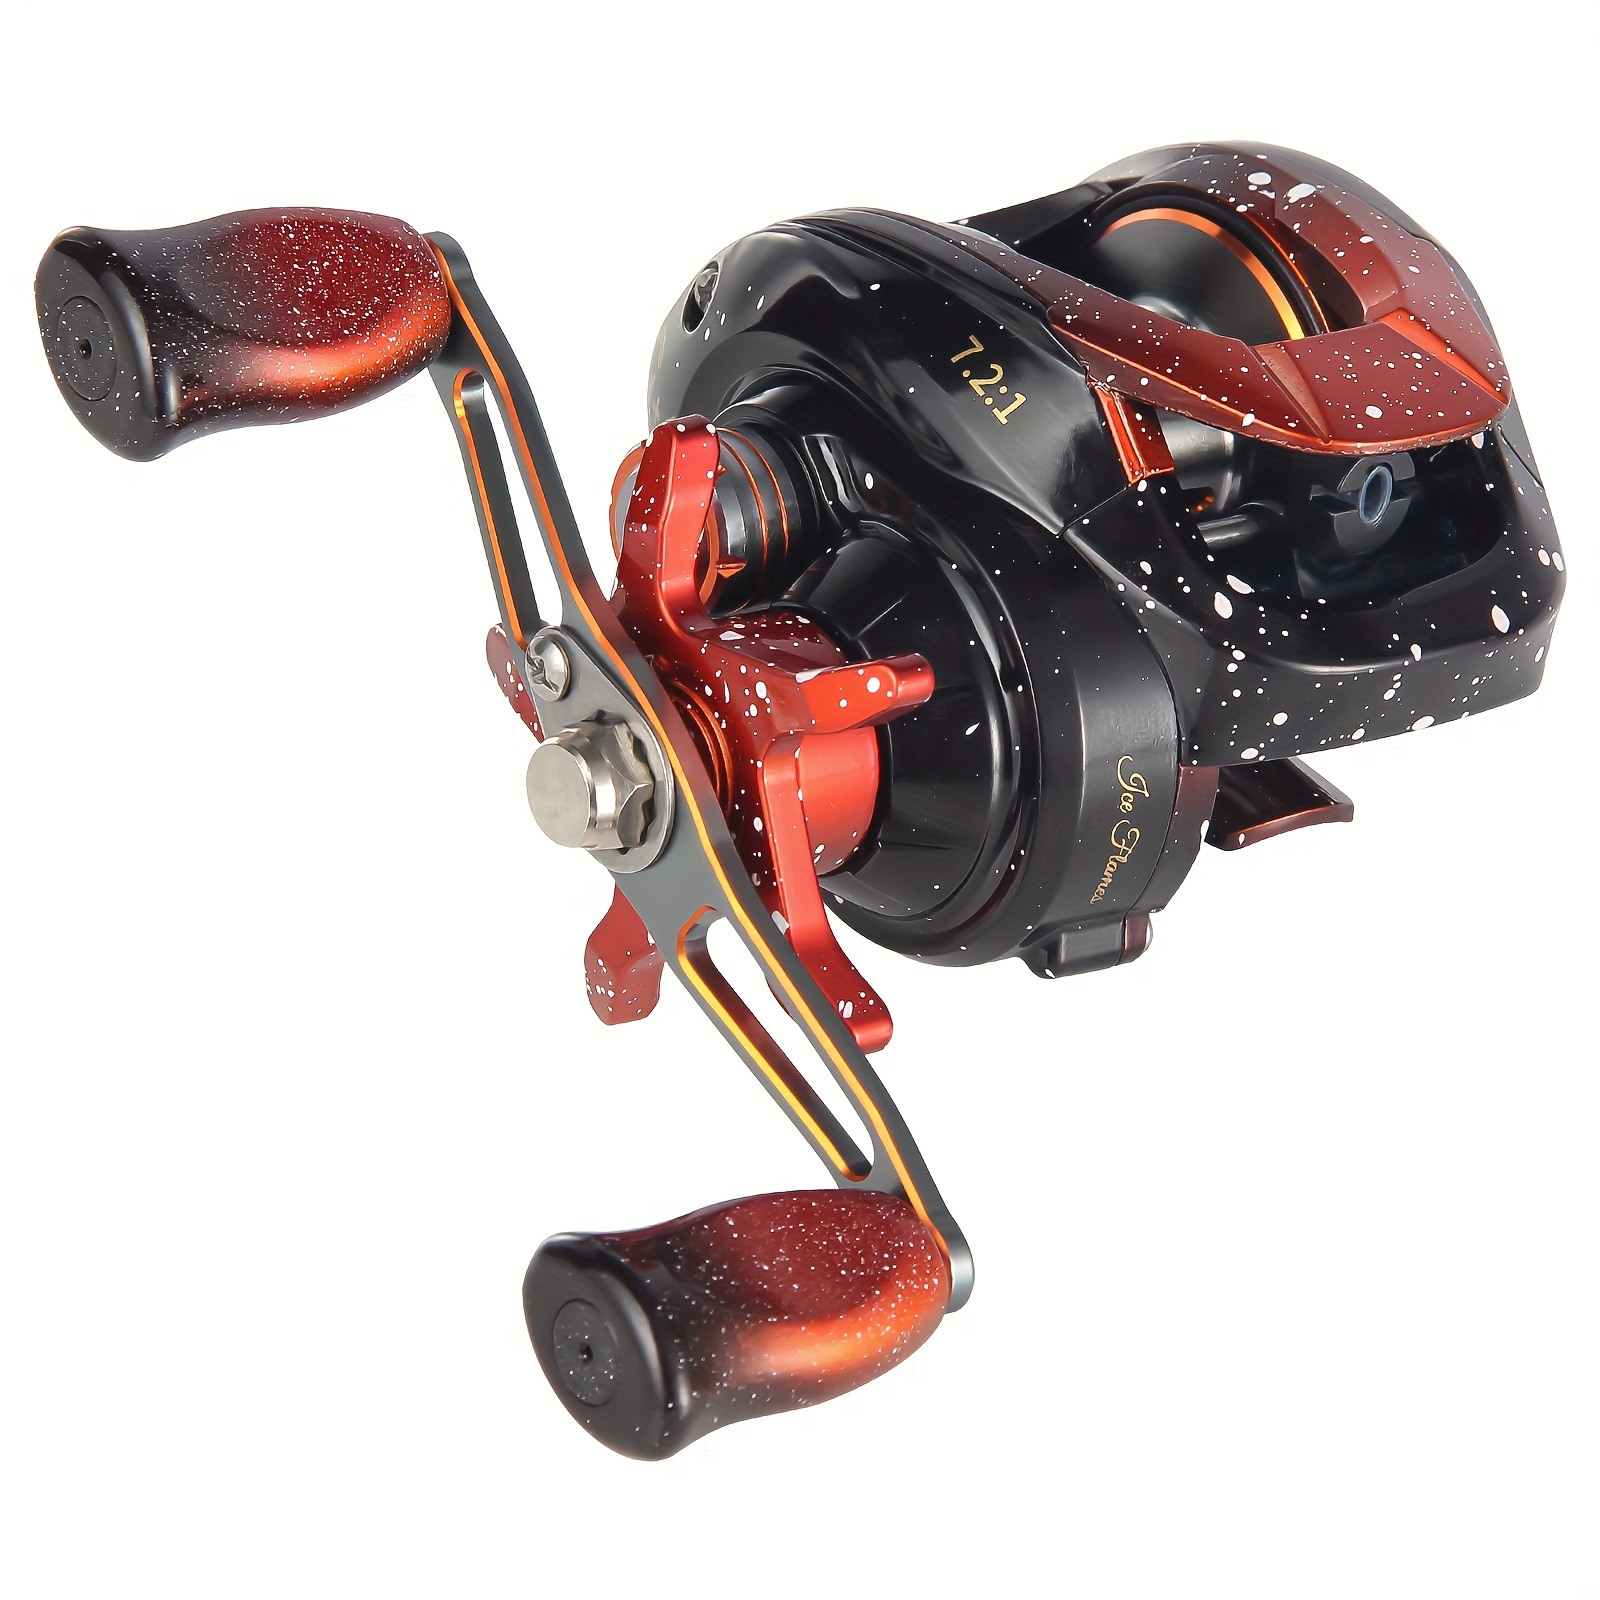 Baitcasting Fishing Reel, 7.2:1 Gear Ratio 4+1BB, Ultra Light Smooth, 22Lbs  Drag System, For Saltwater Freshwater Fishing